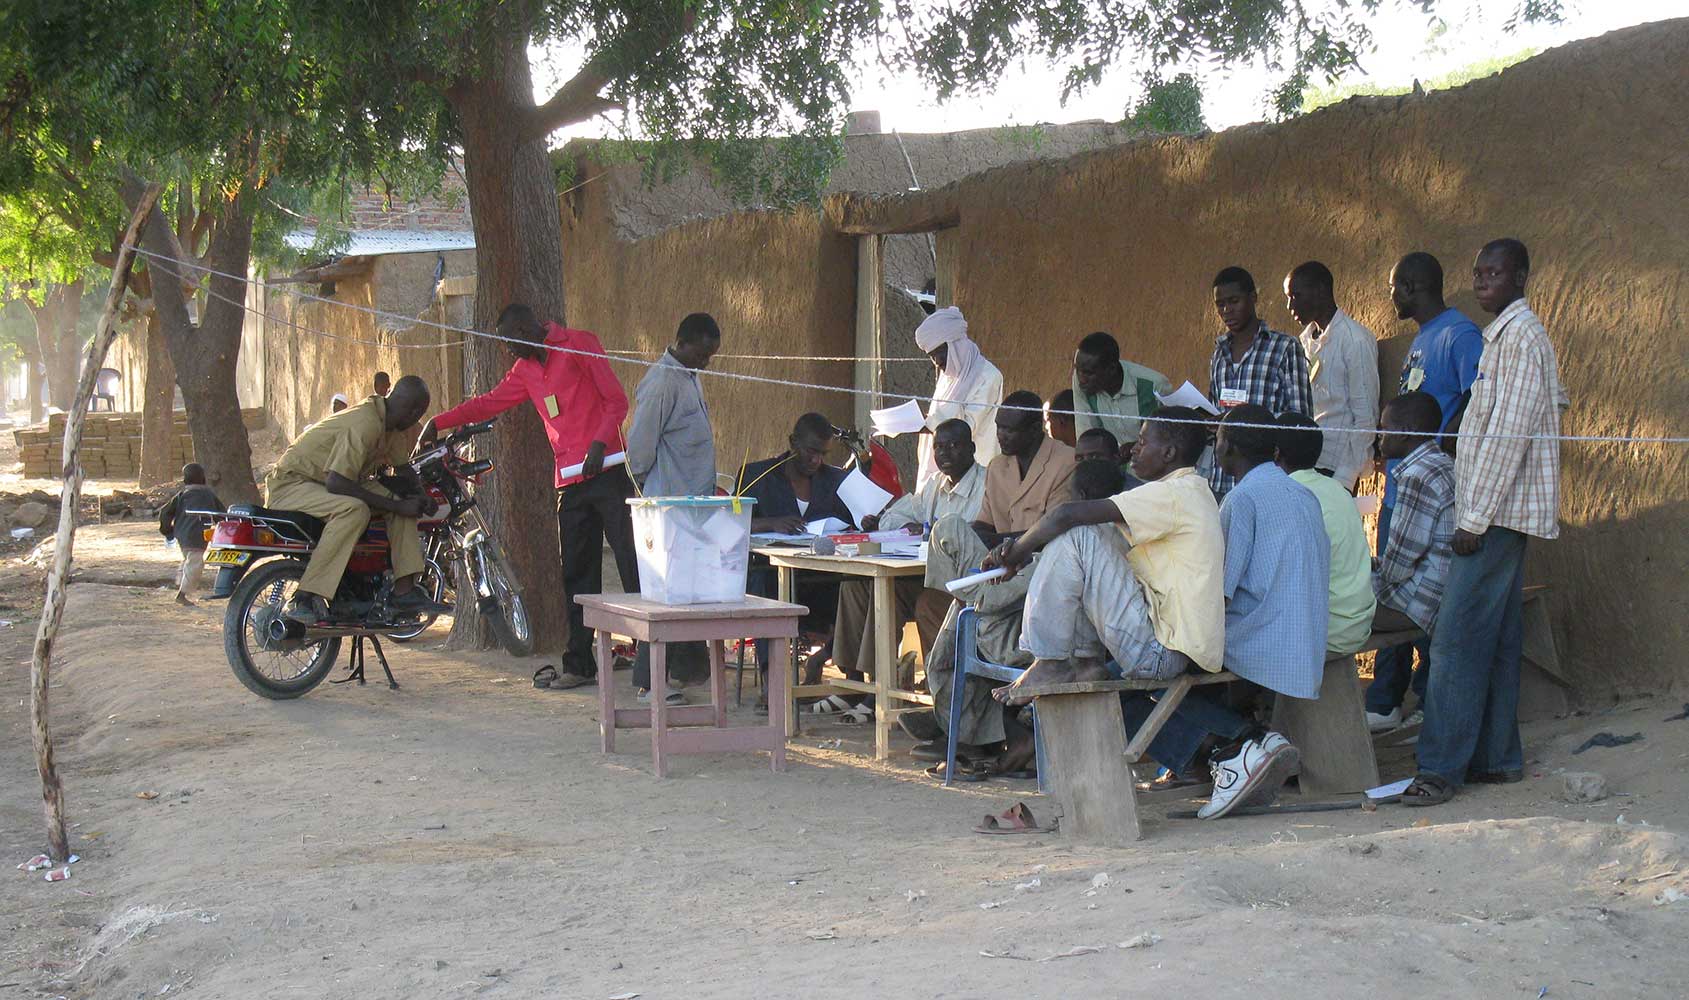 Polling station in Chad in 2011